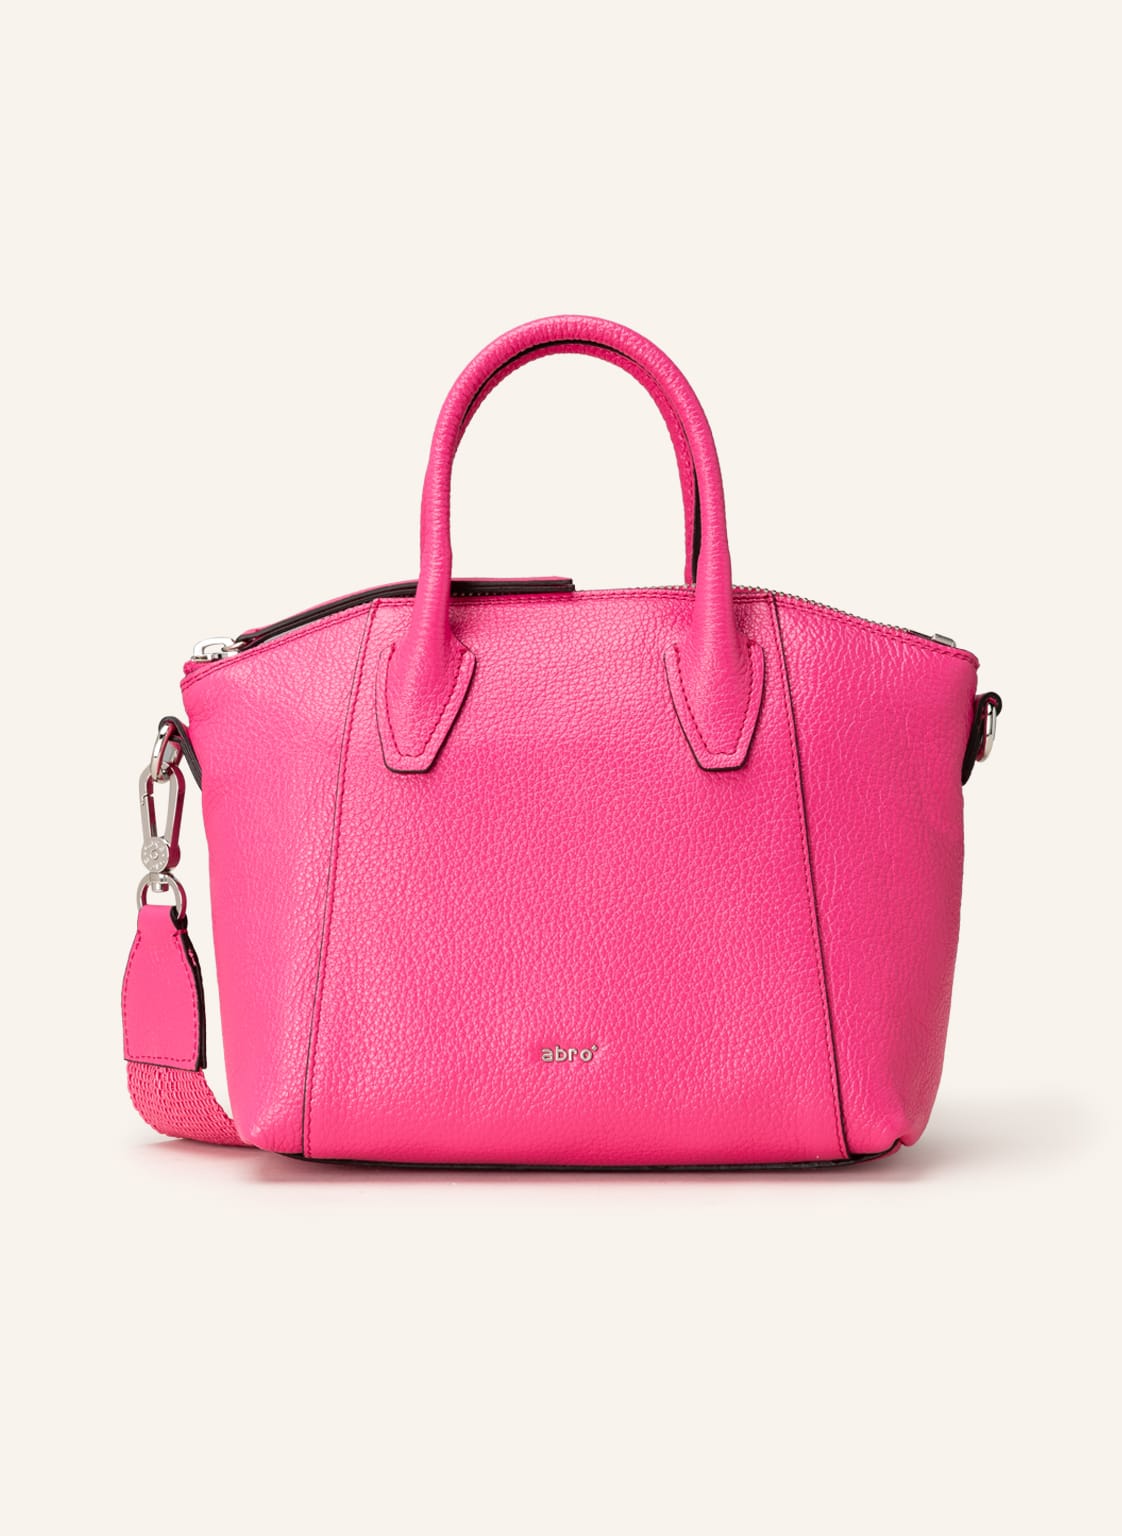 Image of Abro Handtasche Ivy Small pink